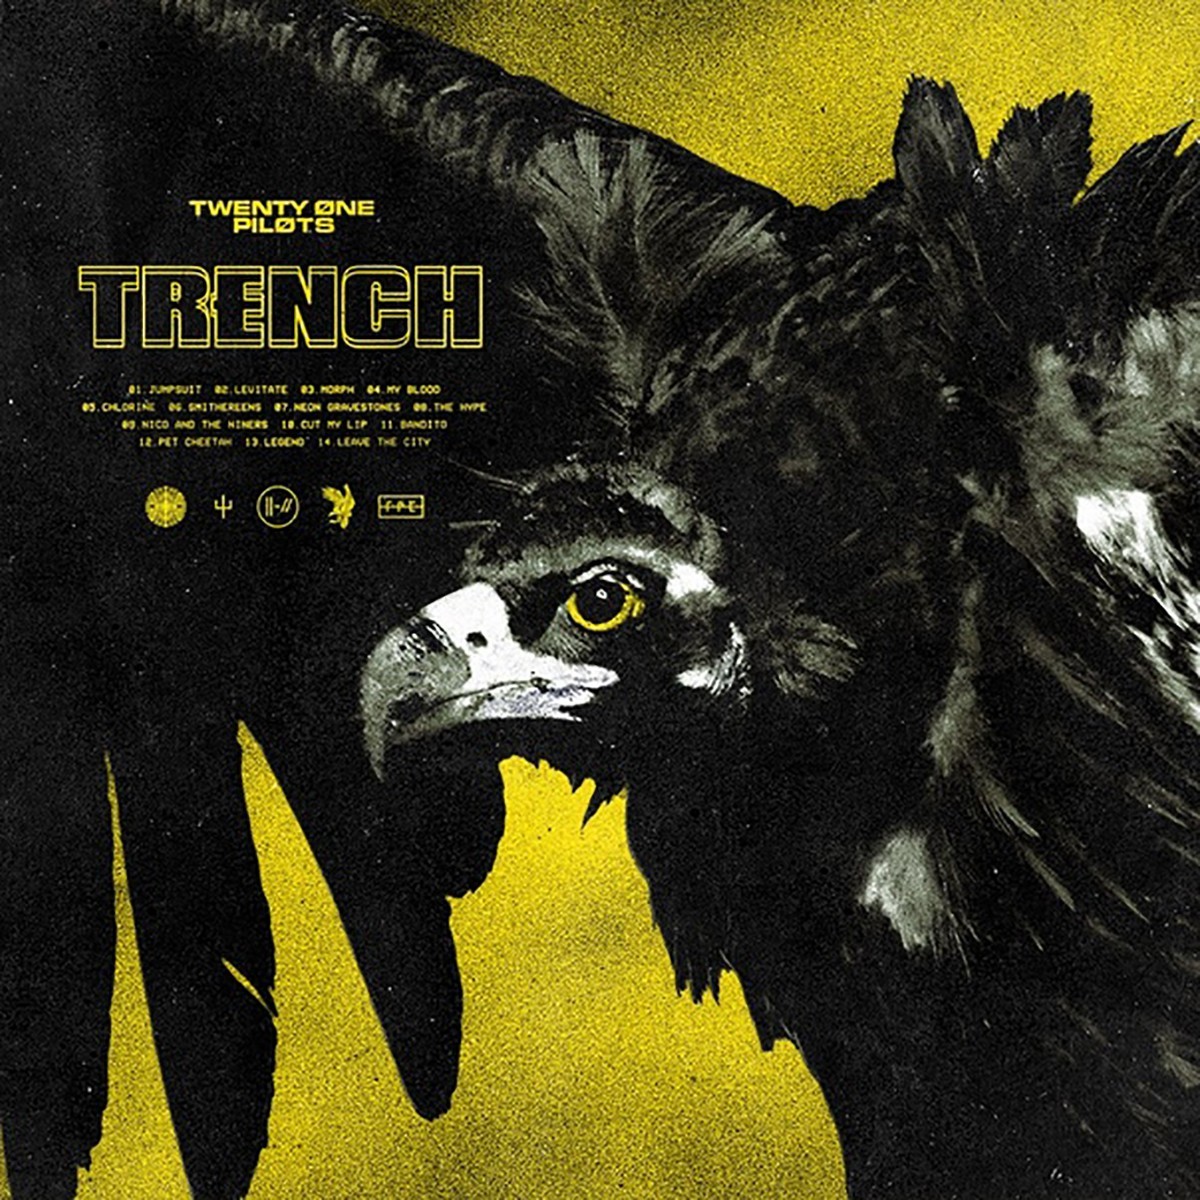 "Trench" album cover by Twenty One Pilots